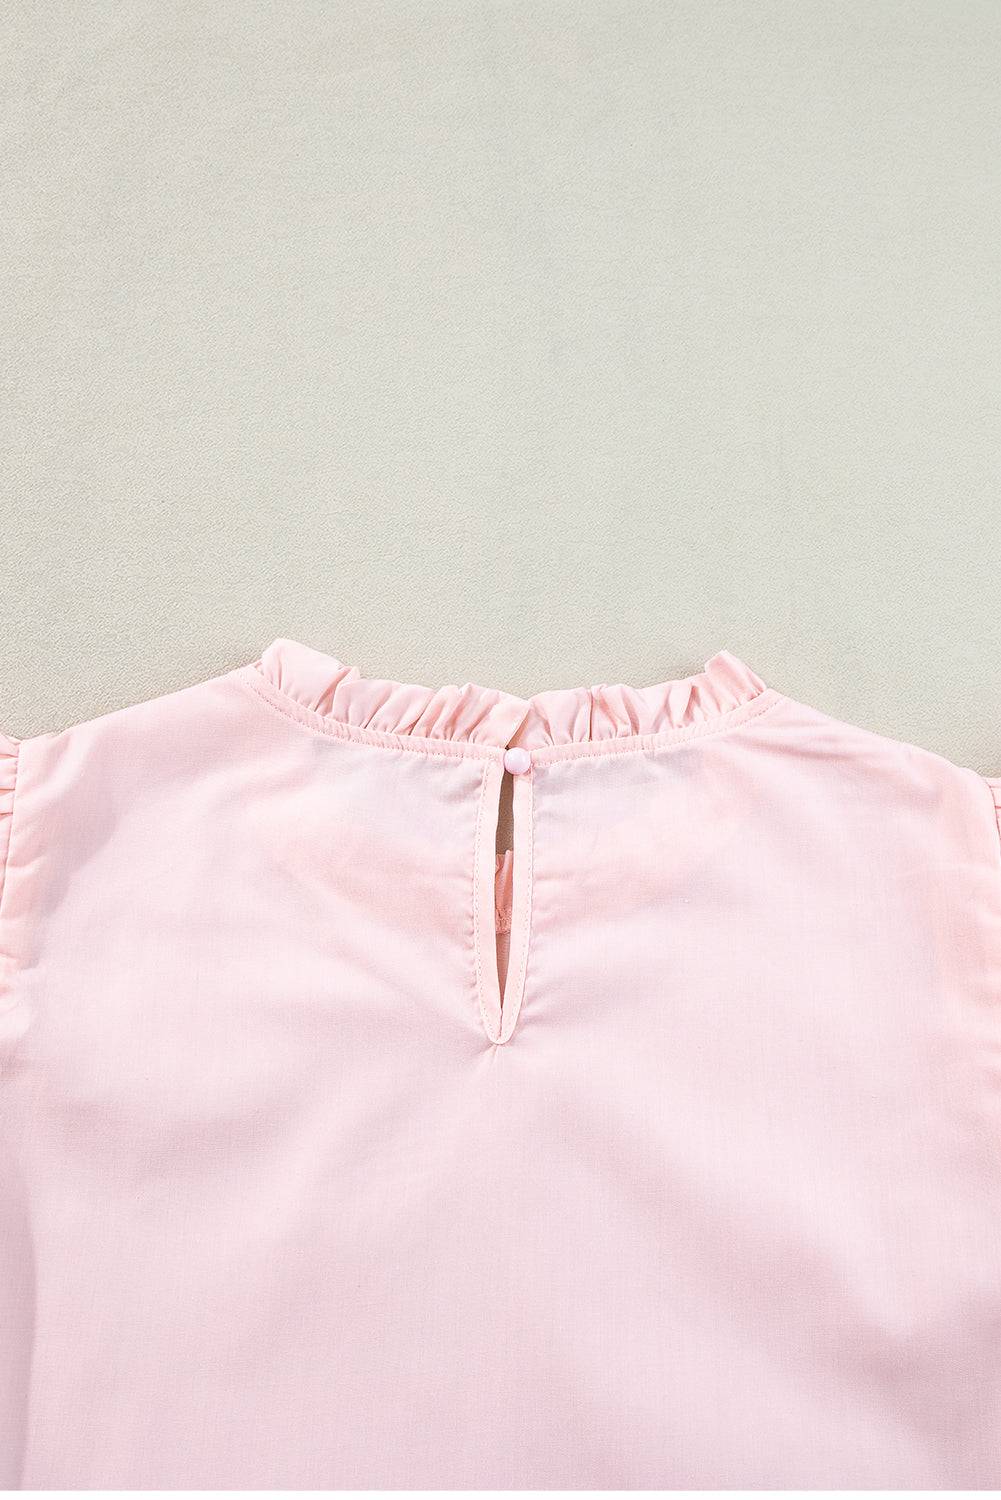 a close up of a pink shirt on a white surface